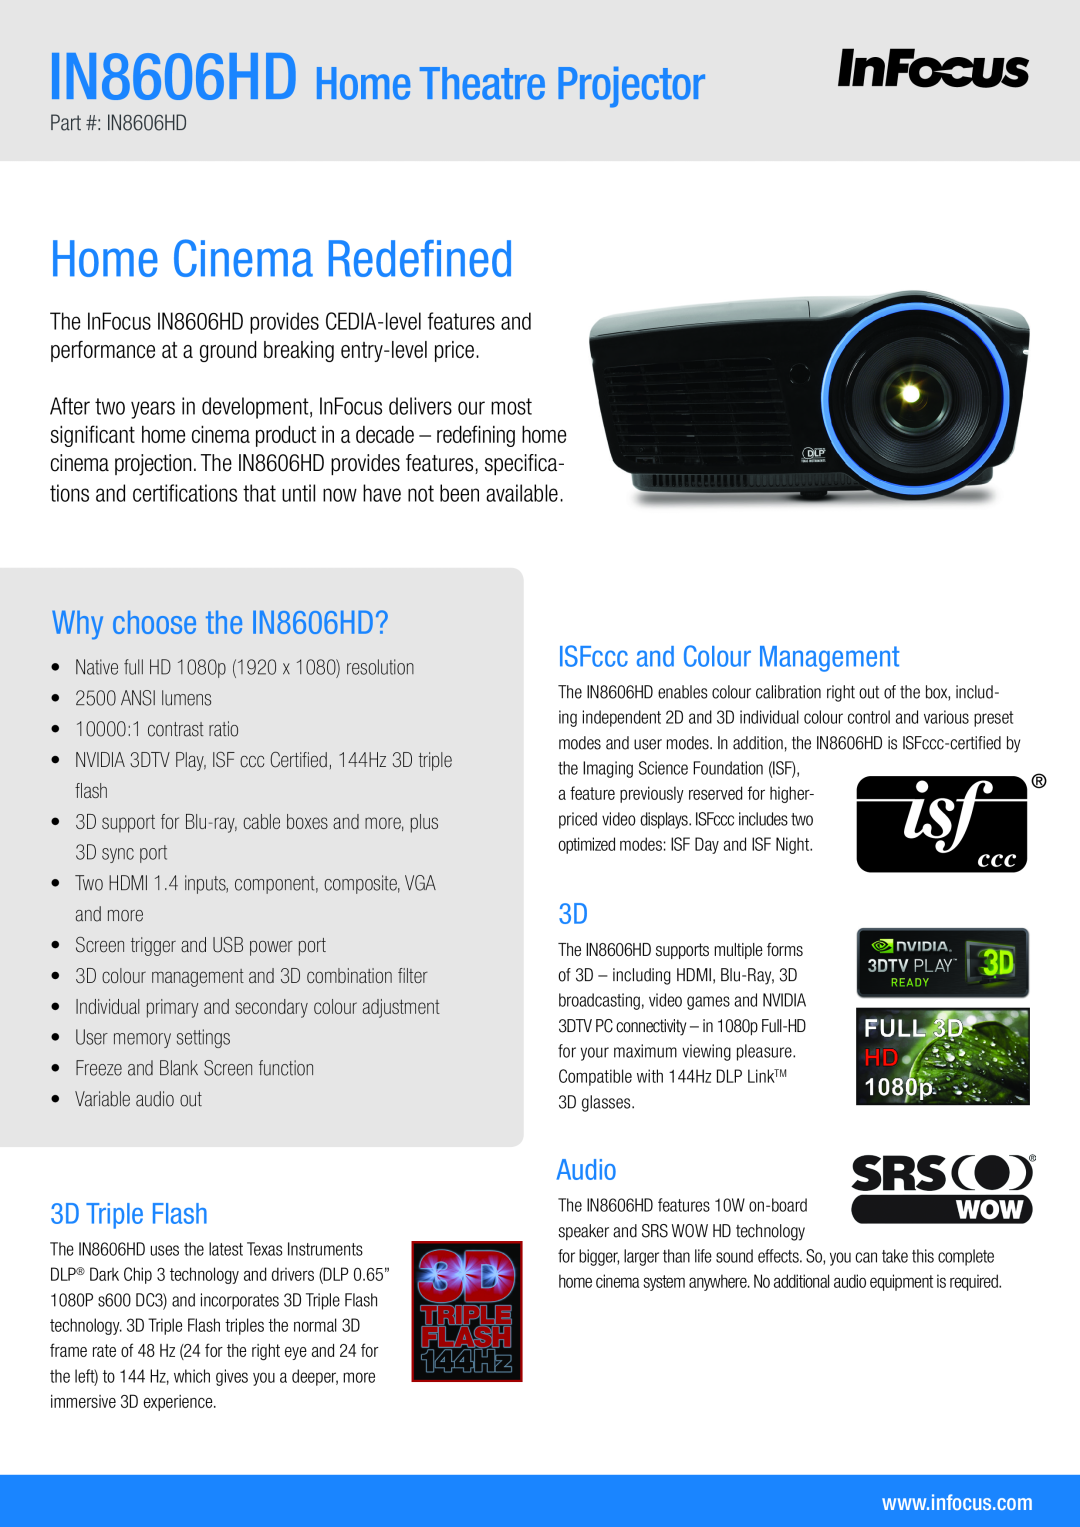 InFocus manual Home Cinema Redefined, 3D Triple Flash, ISFccc and Colour Management, Audio, Why choose the IN8606HD? 